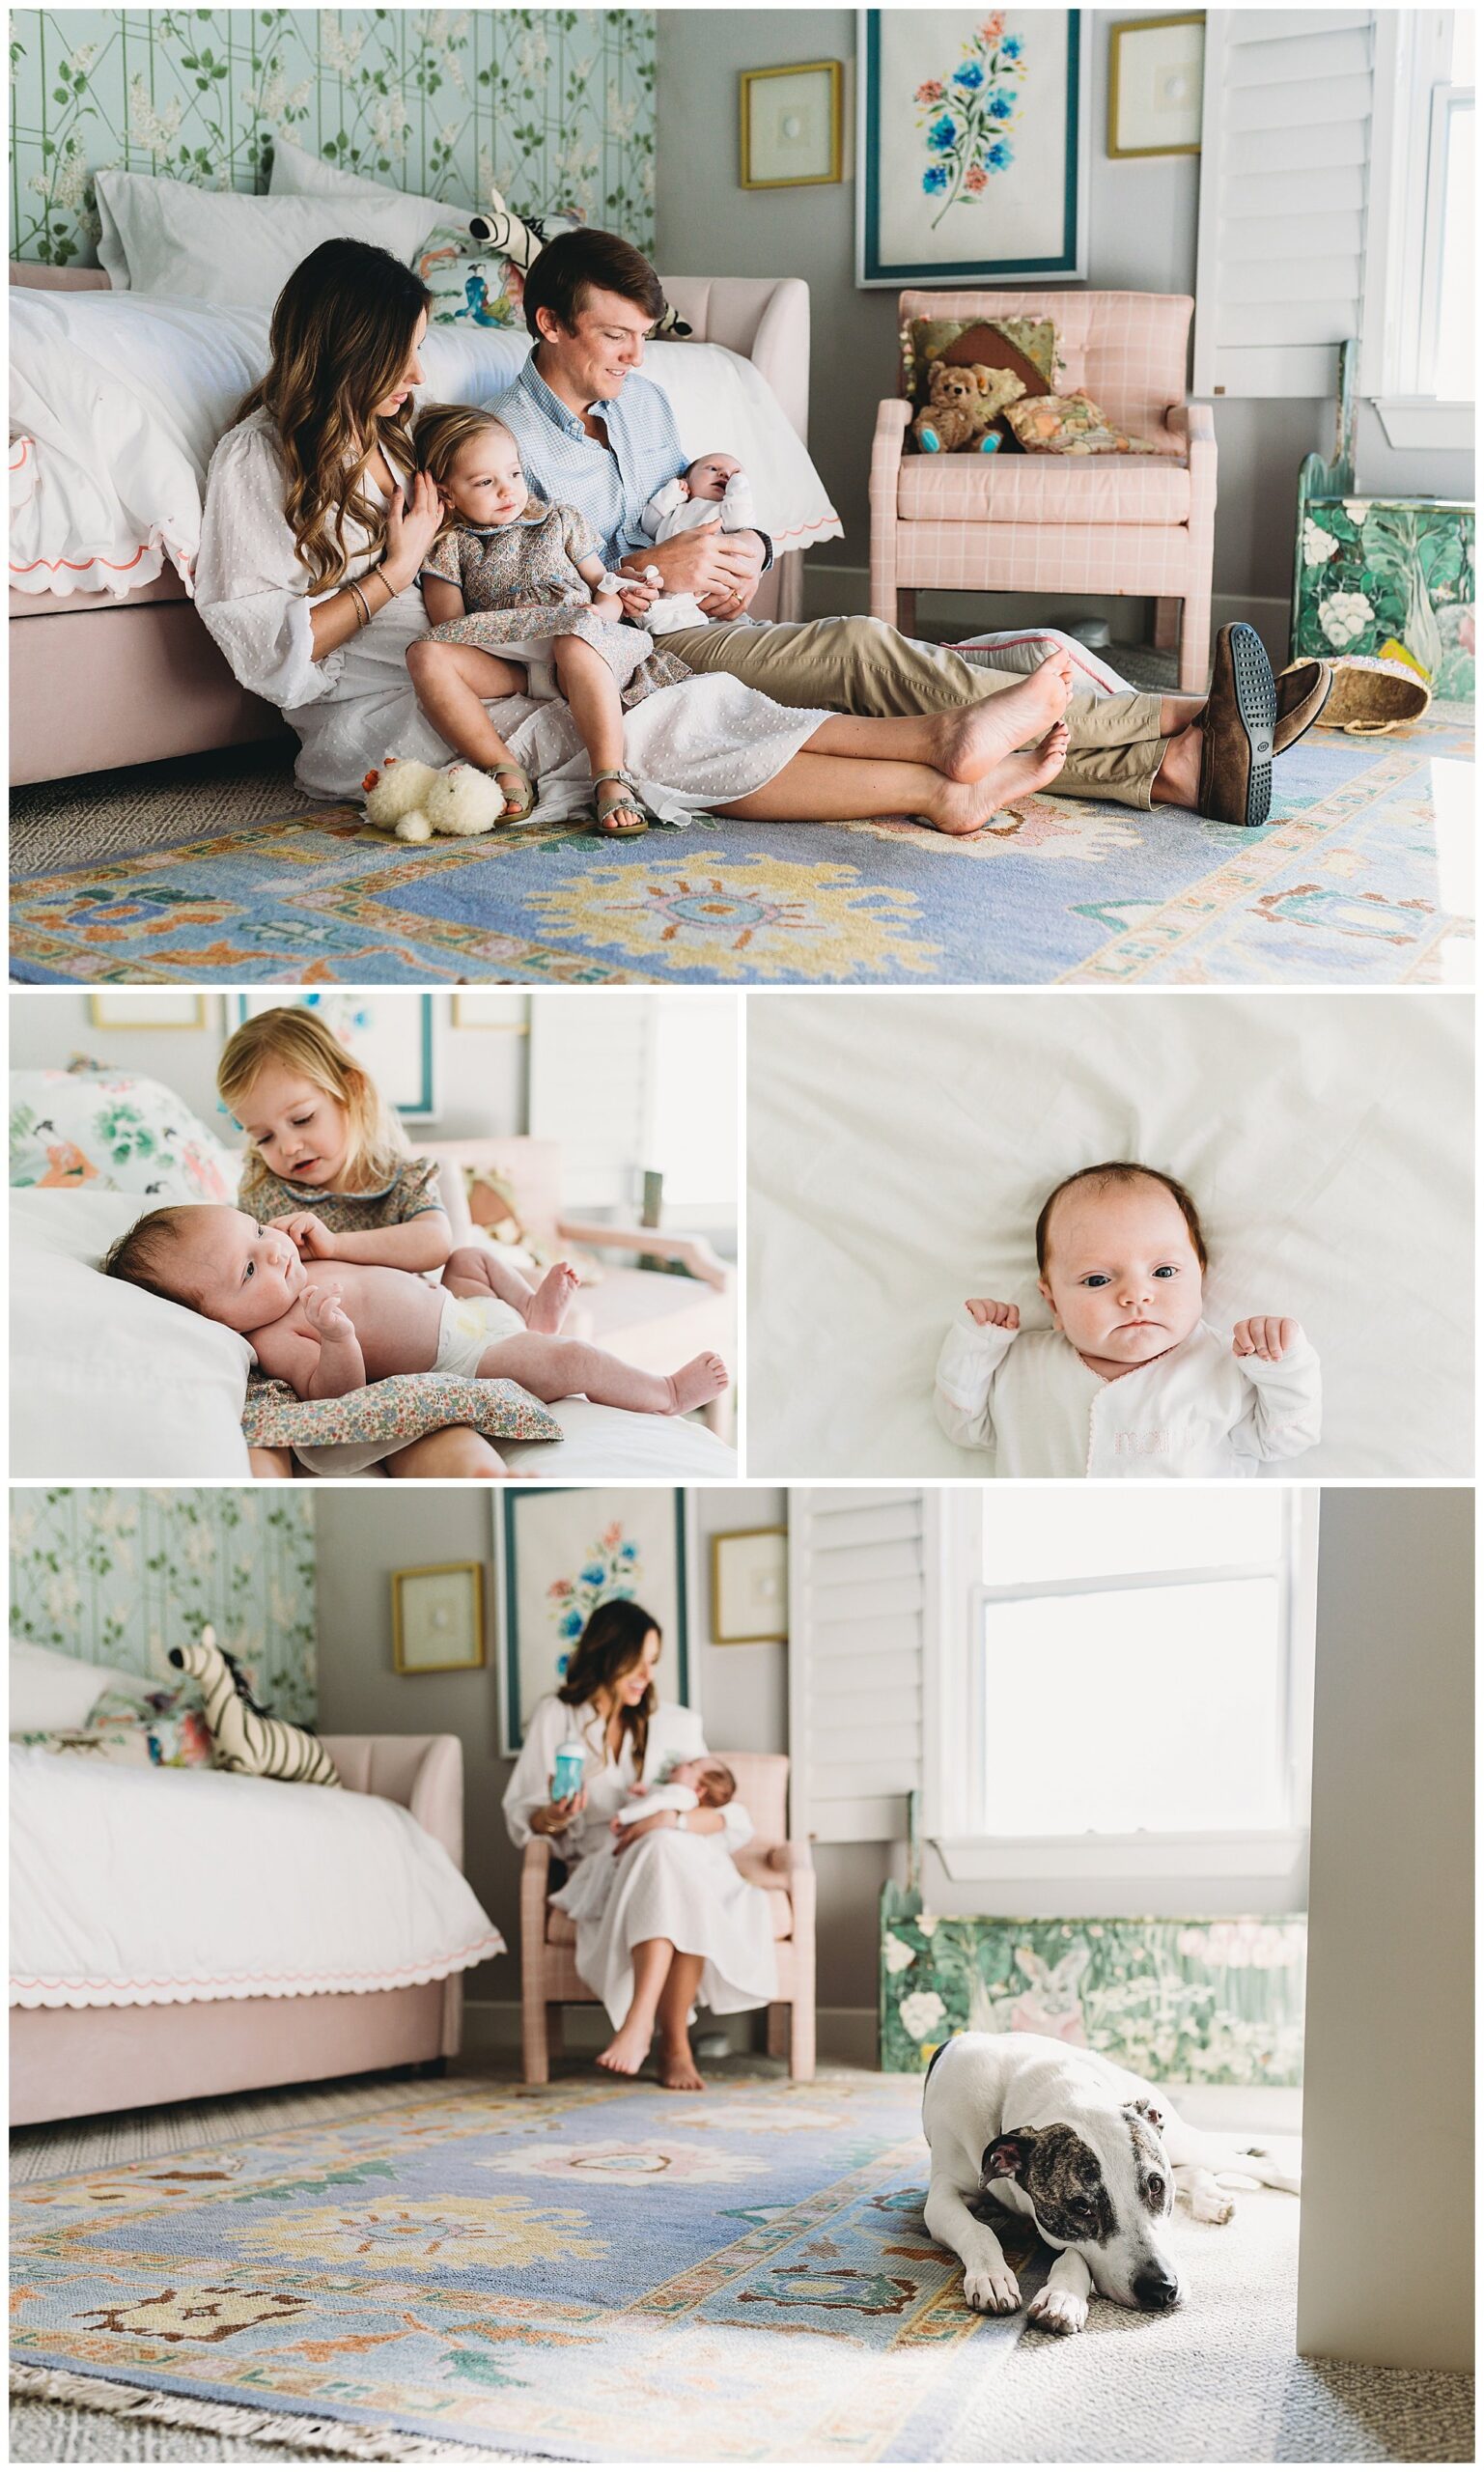 newborn baby on a bed, big sister and newborn sitting together, dog in a pink nursery